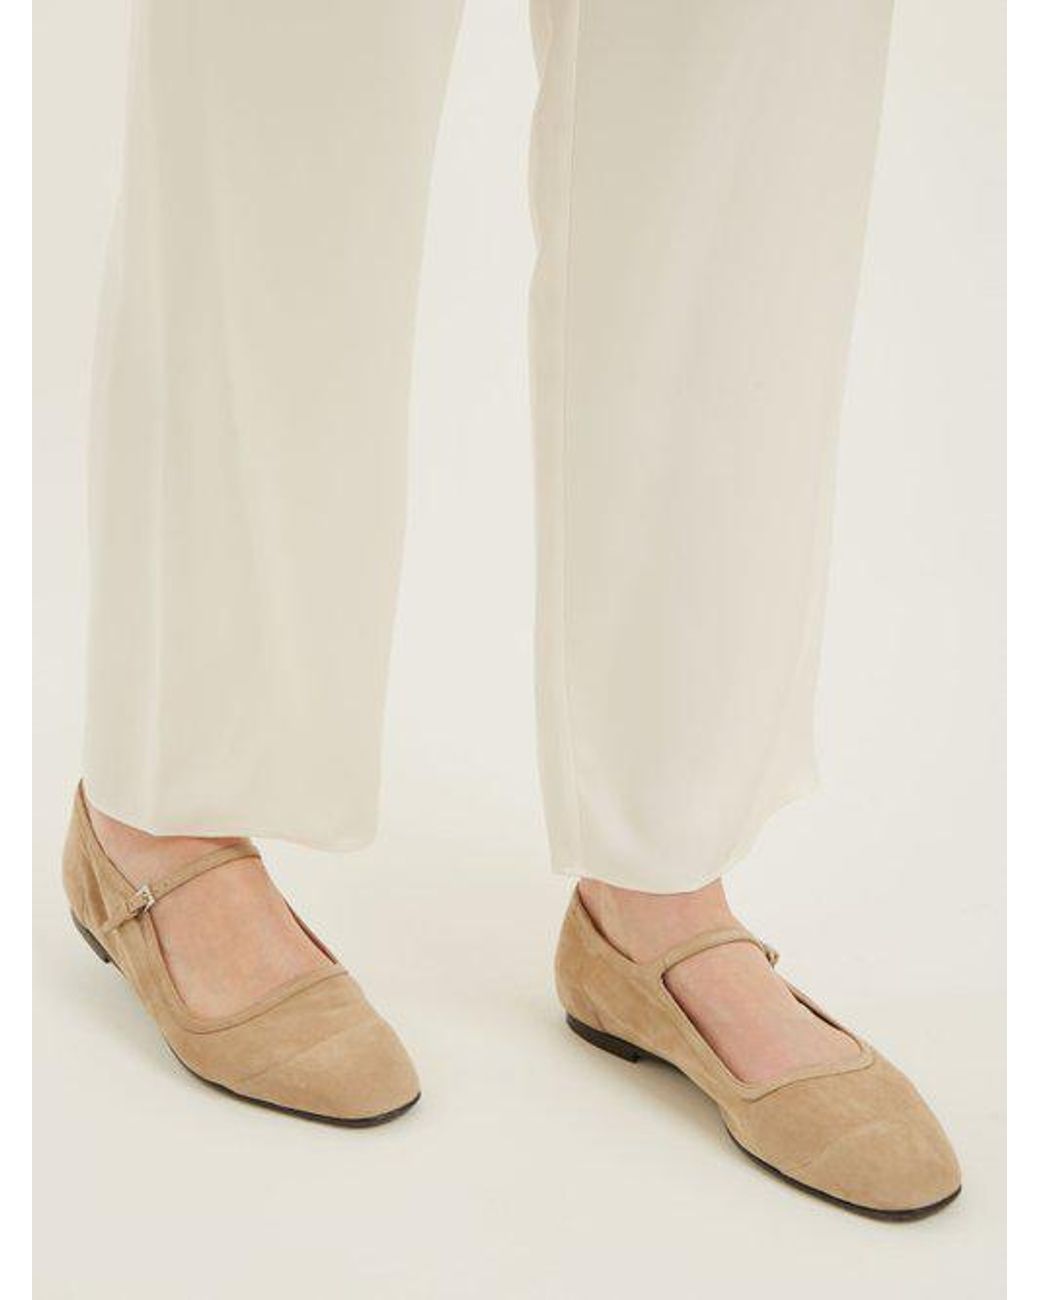 The Row Ava Mary-jane Suede Pumps in Natural | Lyst Canada